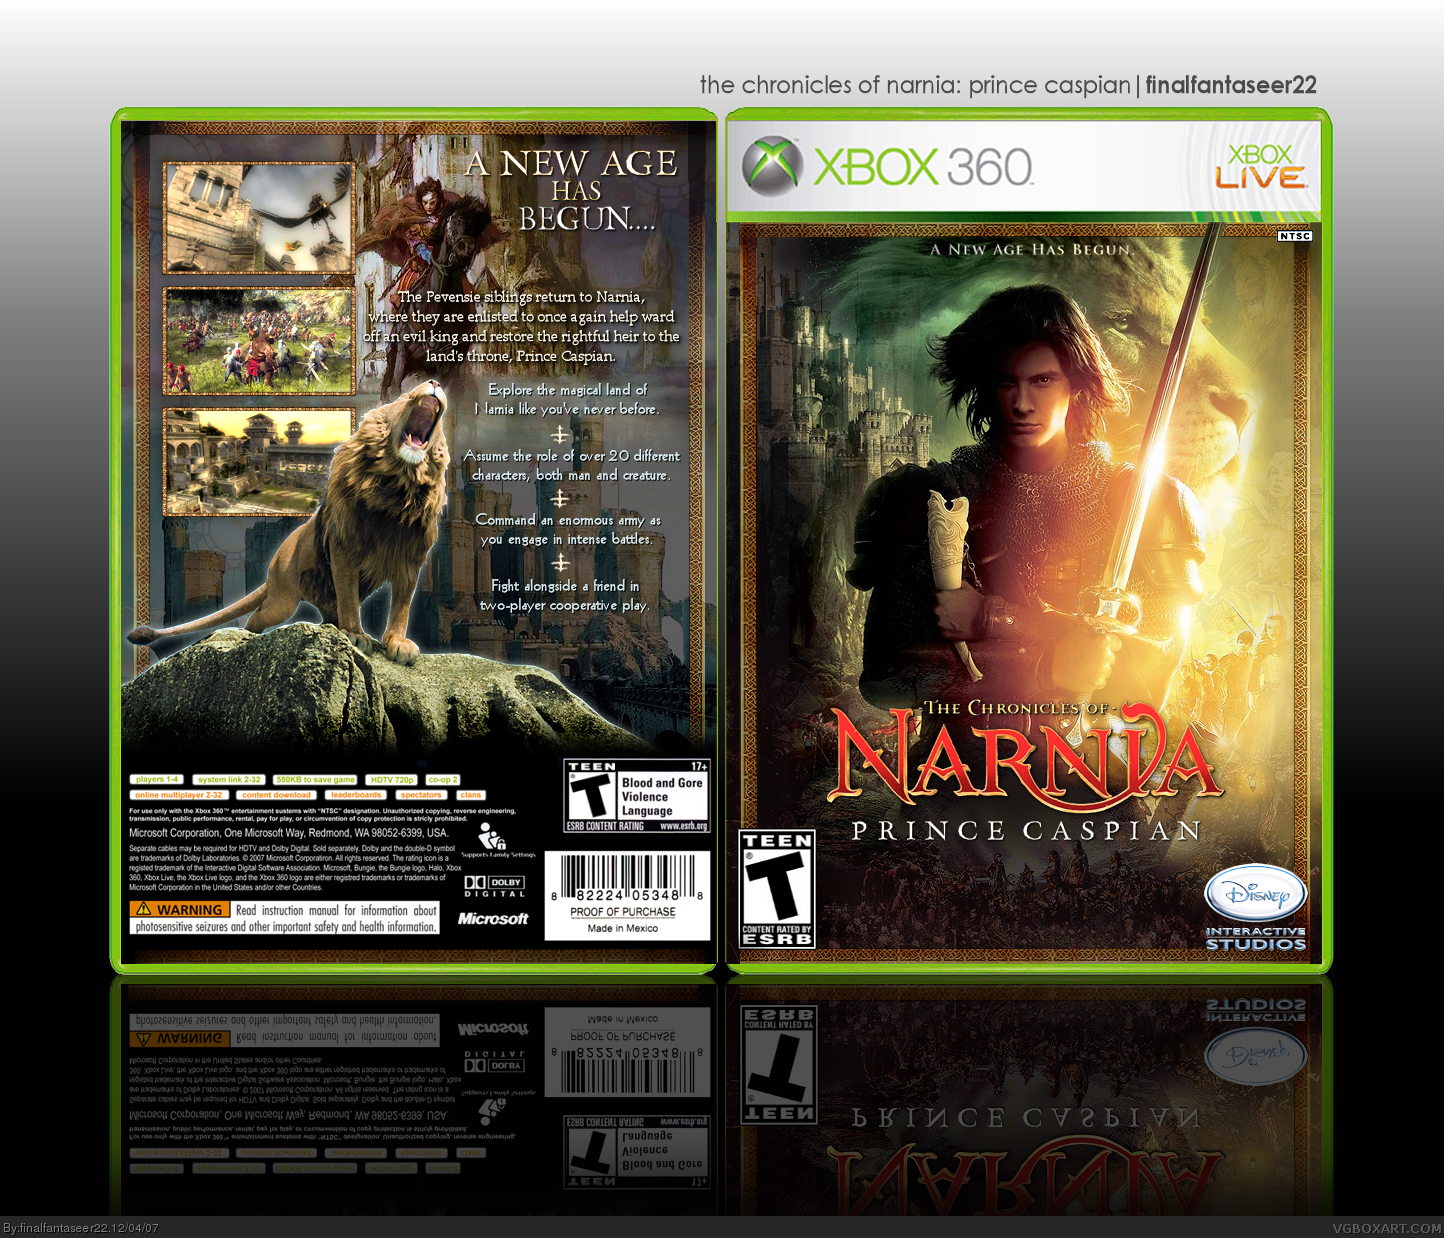 The Chronicles of Narnia: Prince Caspian box cover